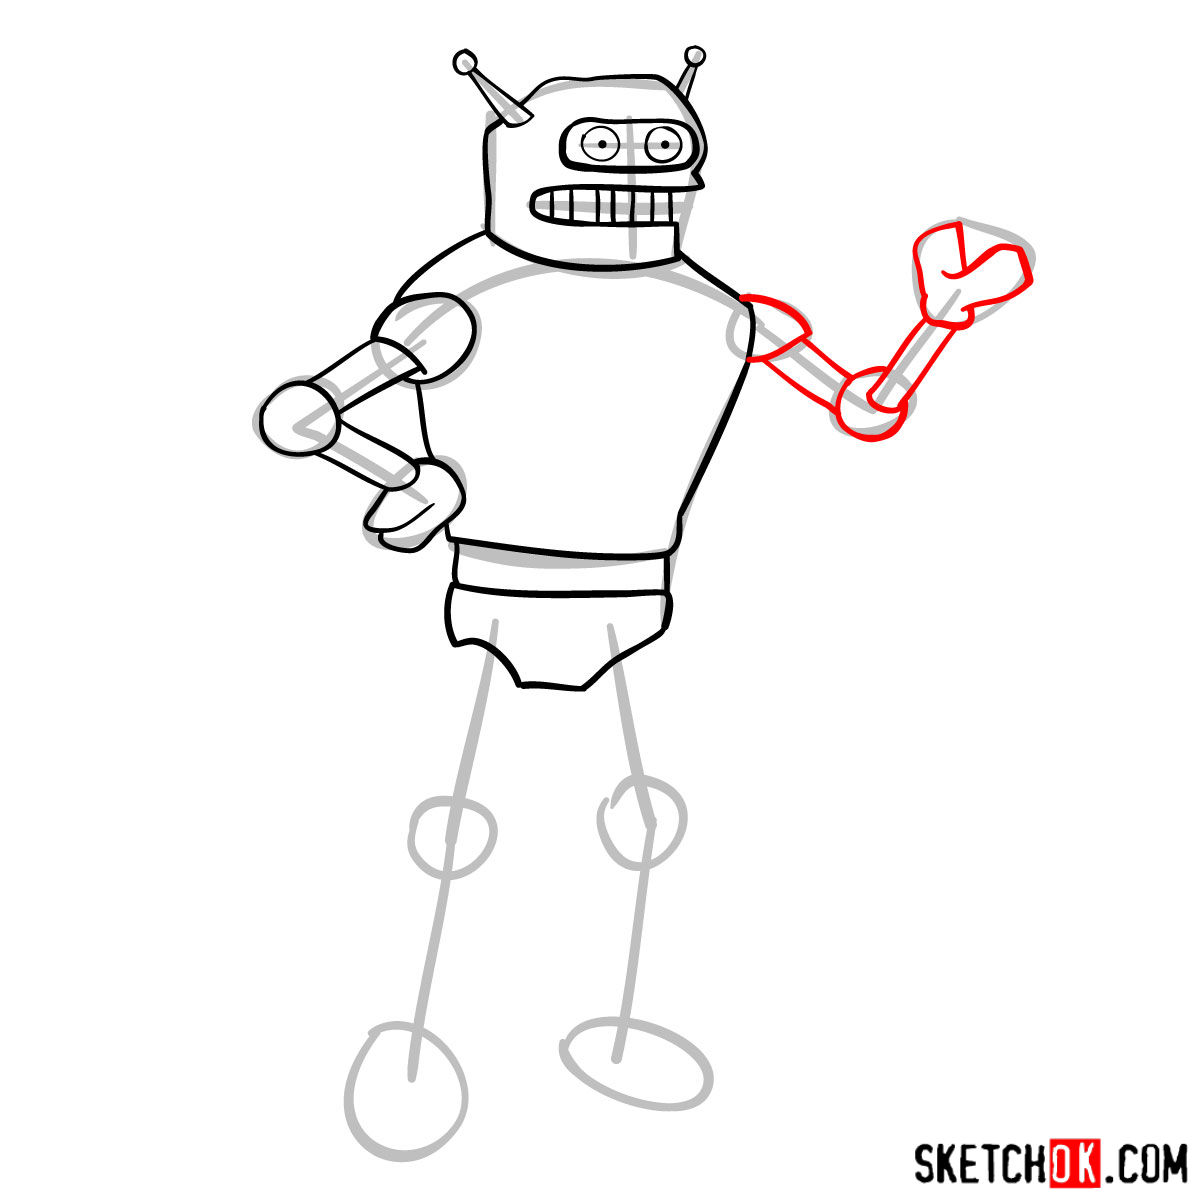 How to draw Calculon from Futurama - step 08